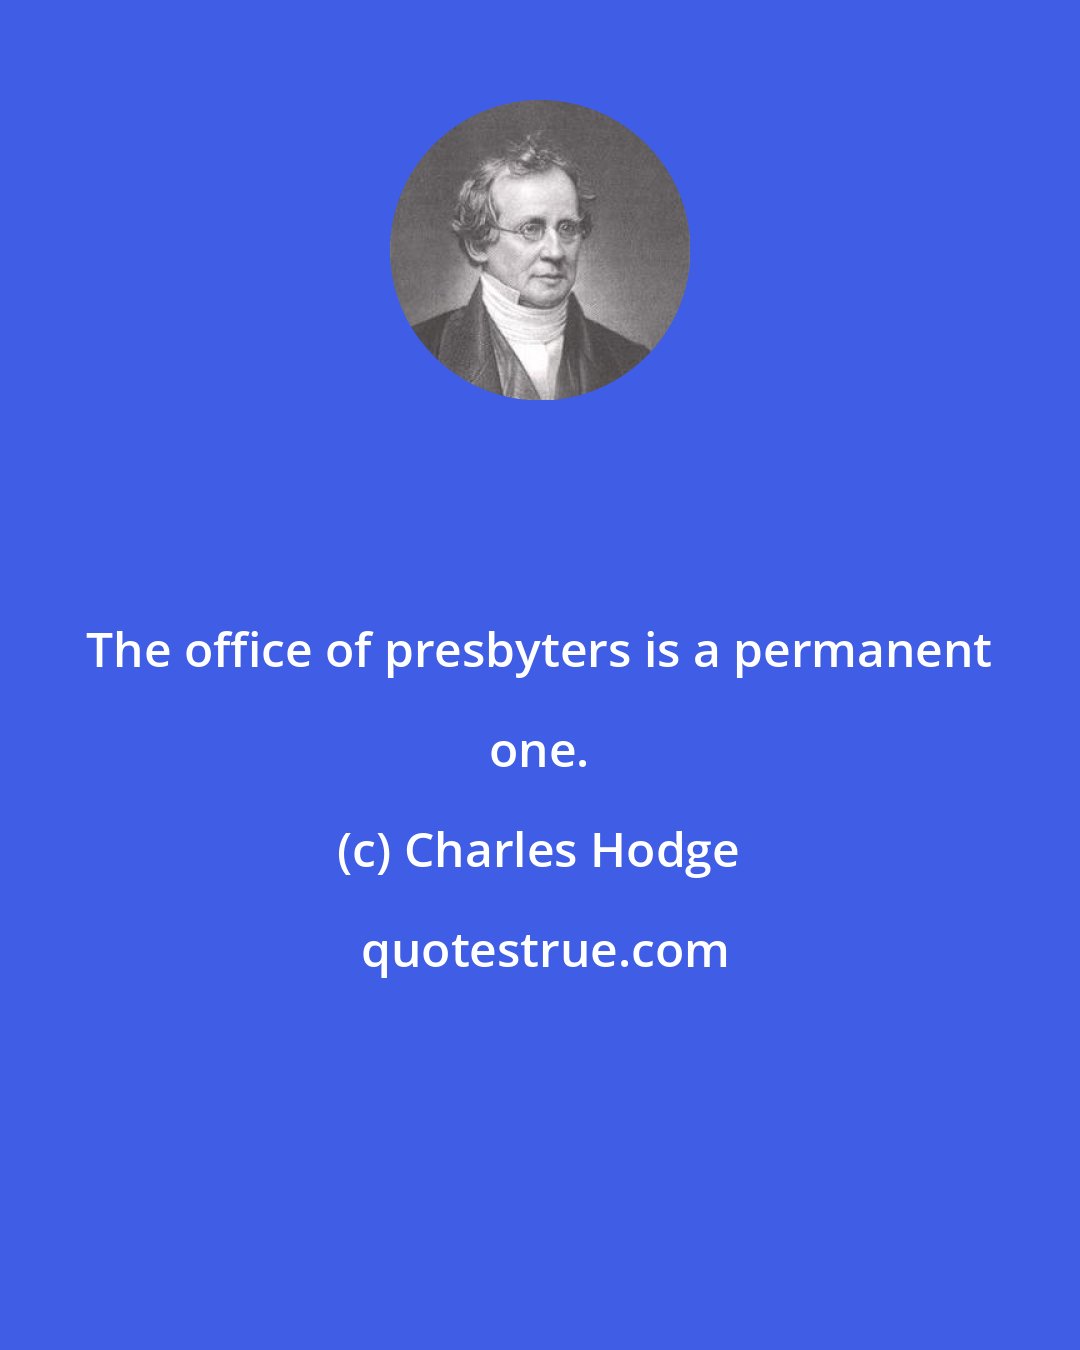 Charles Hodge: The office of presbyters is a permanent one.